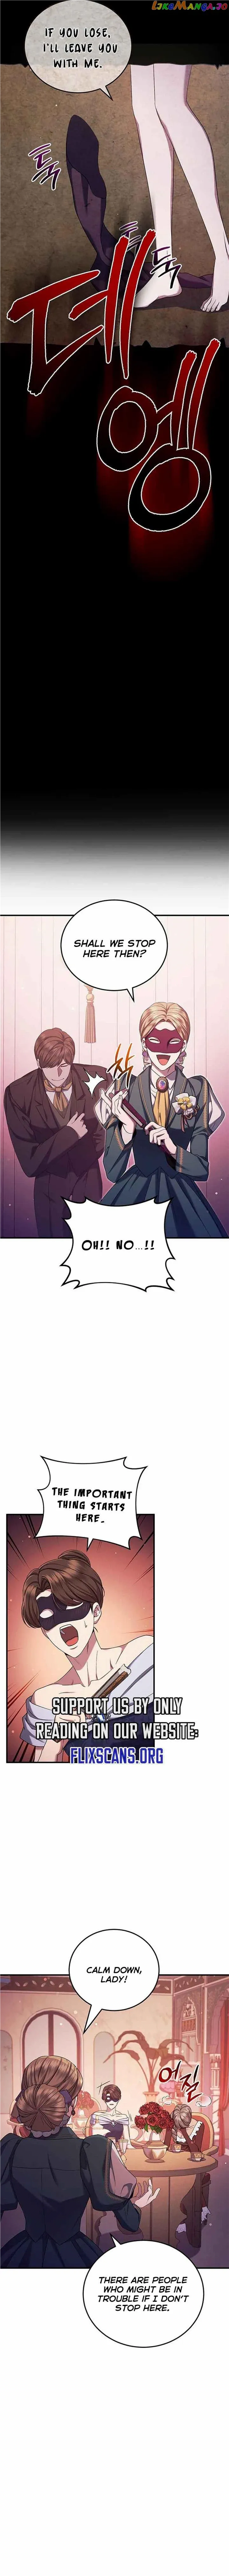 Who Stole Empress - Page 3